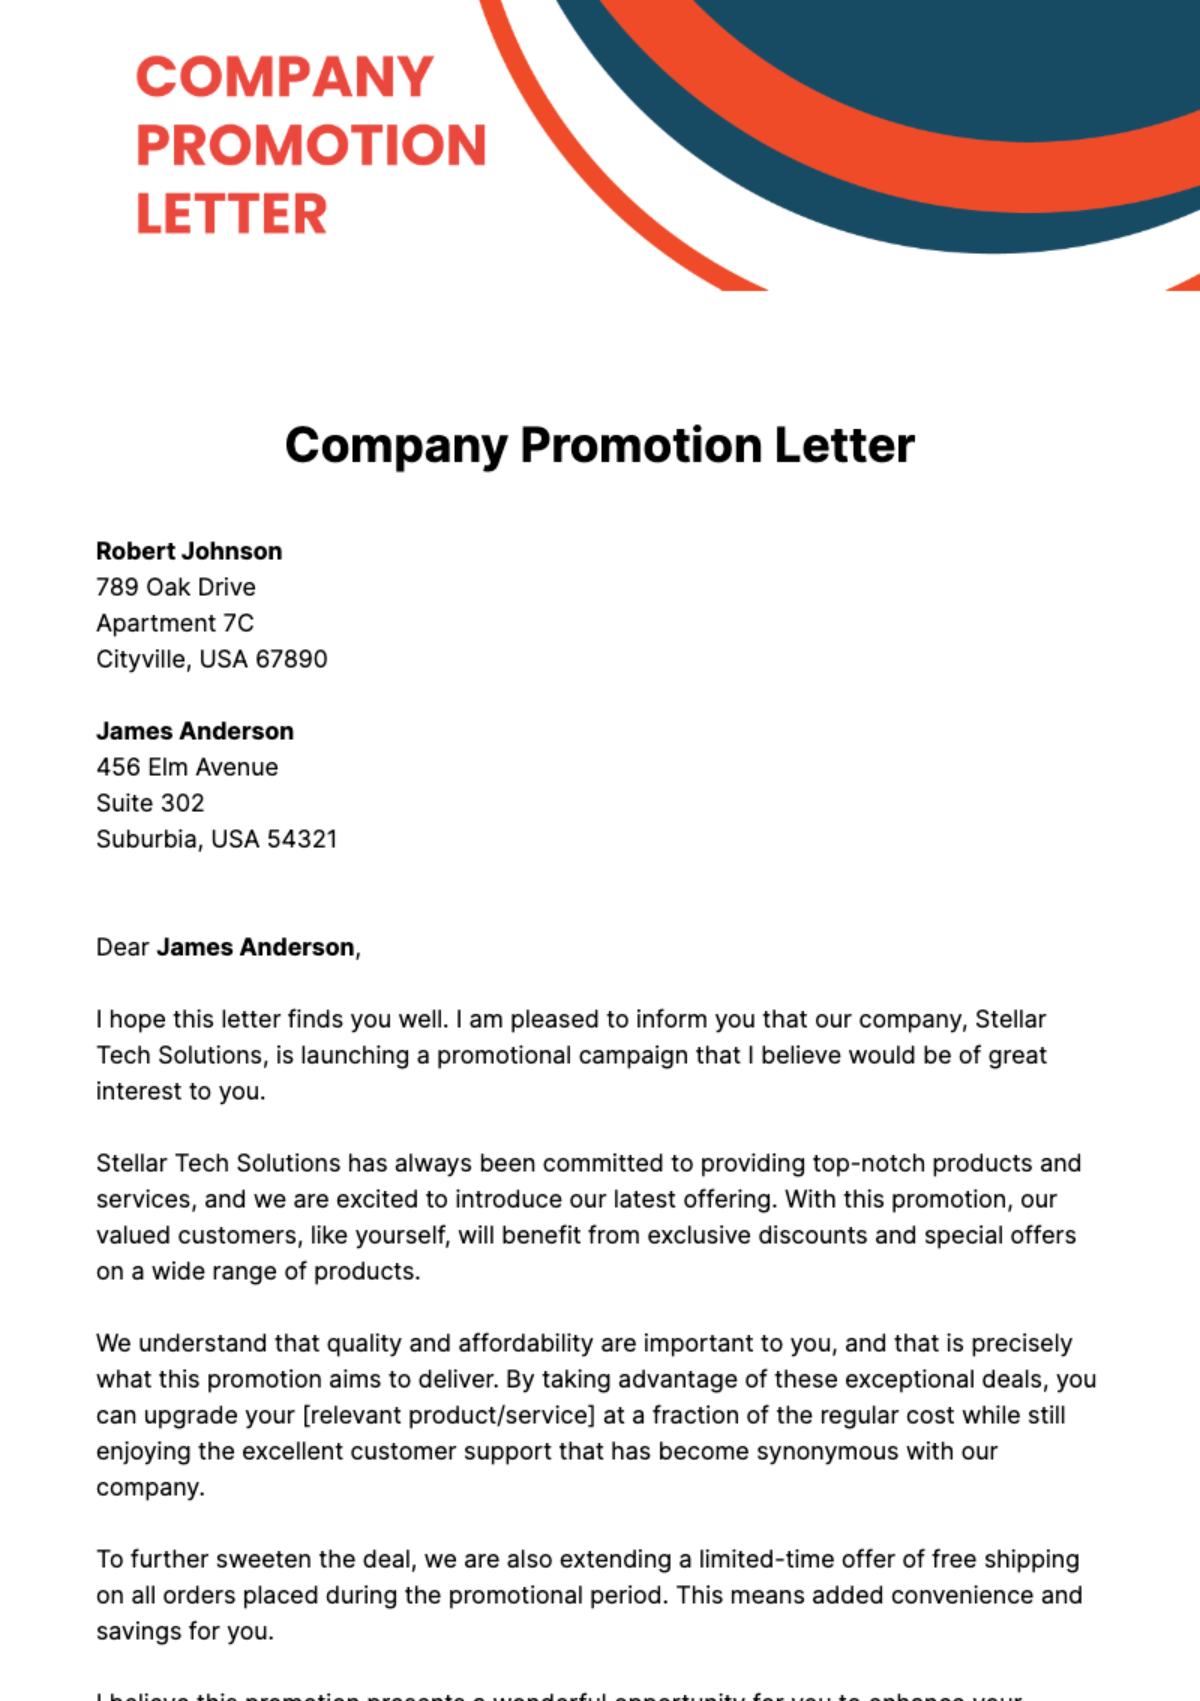 Free Company Promotion Letter Template